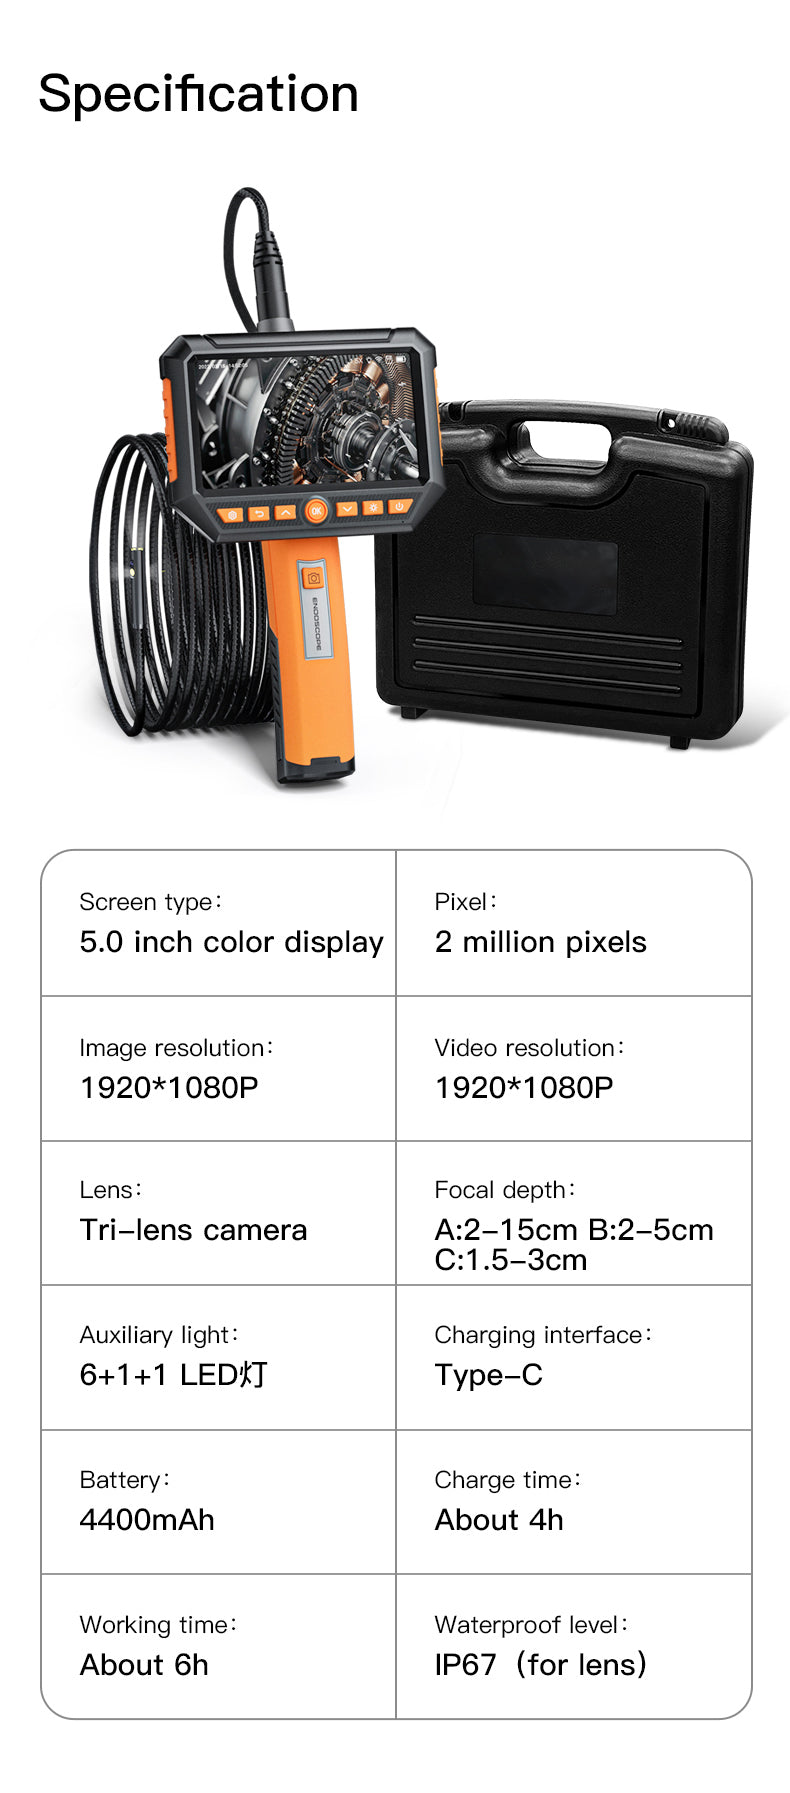 Borescope Inspection Camera - 8mm Triple Lens Handheld Endoscope Camera with 5 "IPS LCD Monitor & WiFi